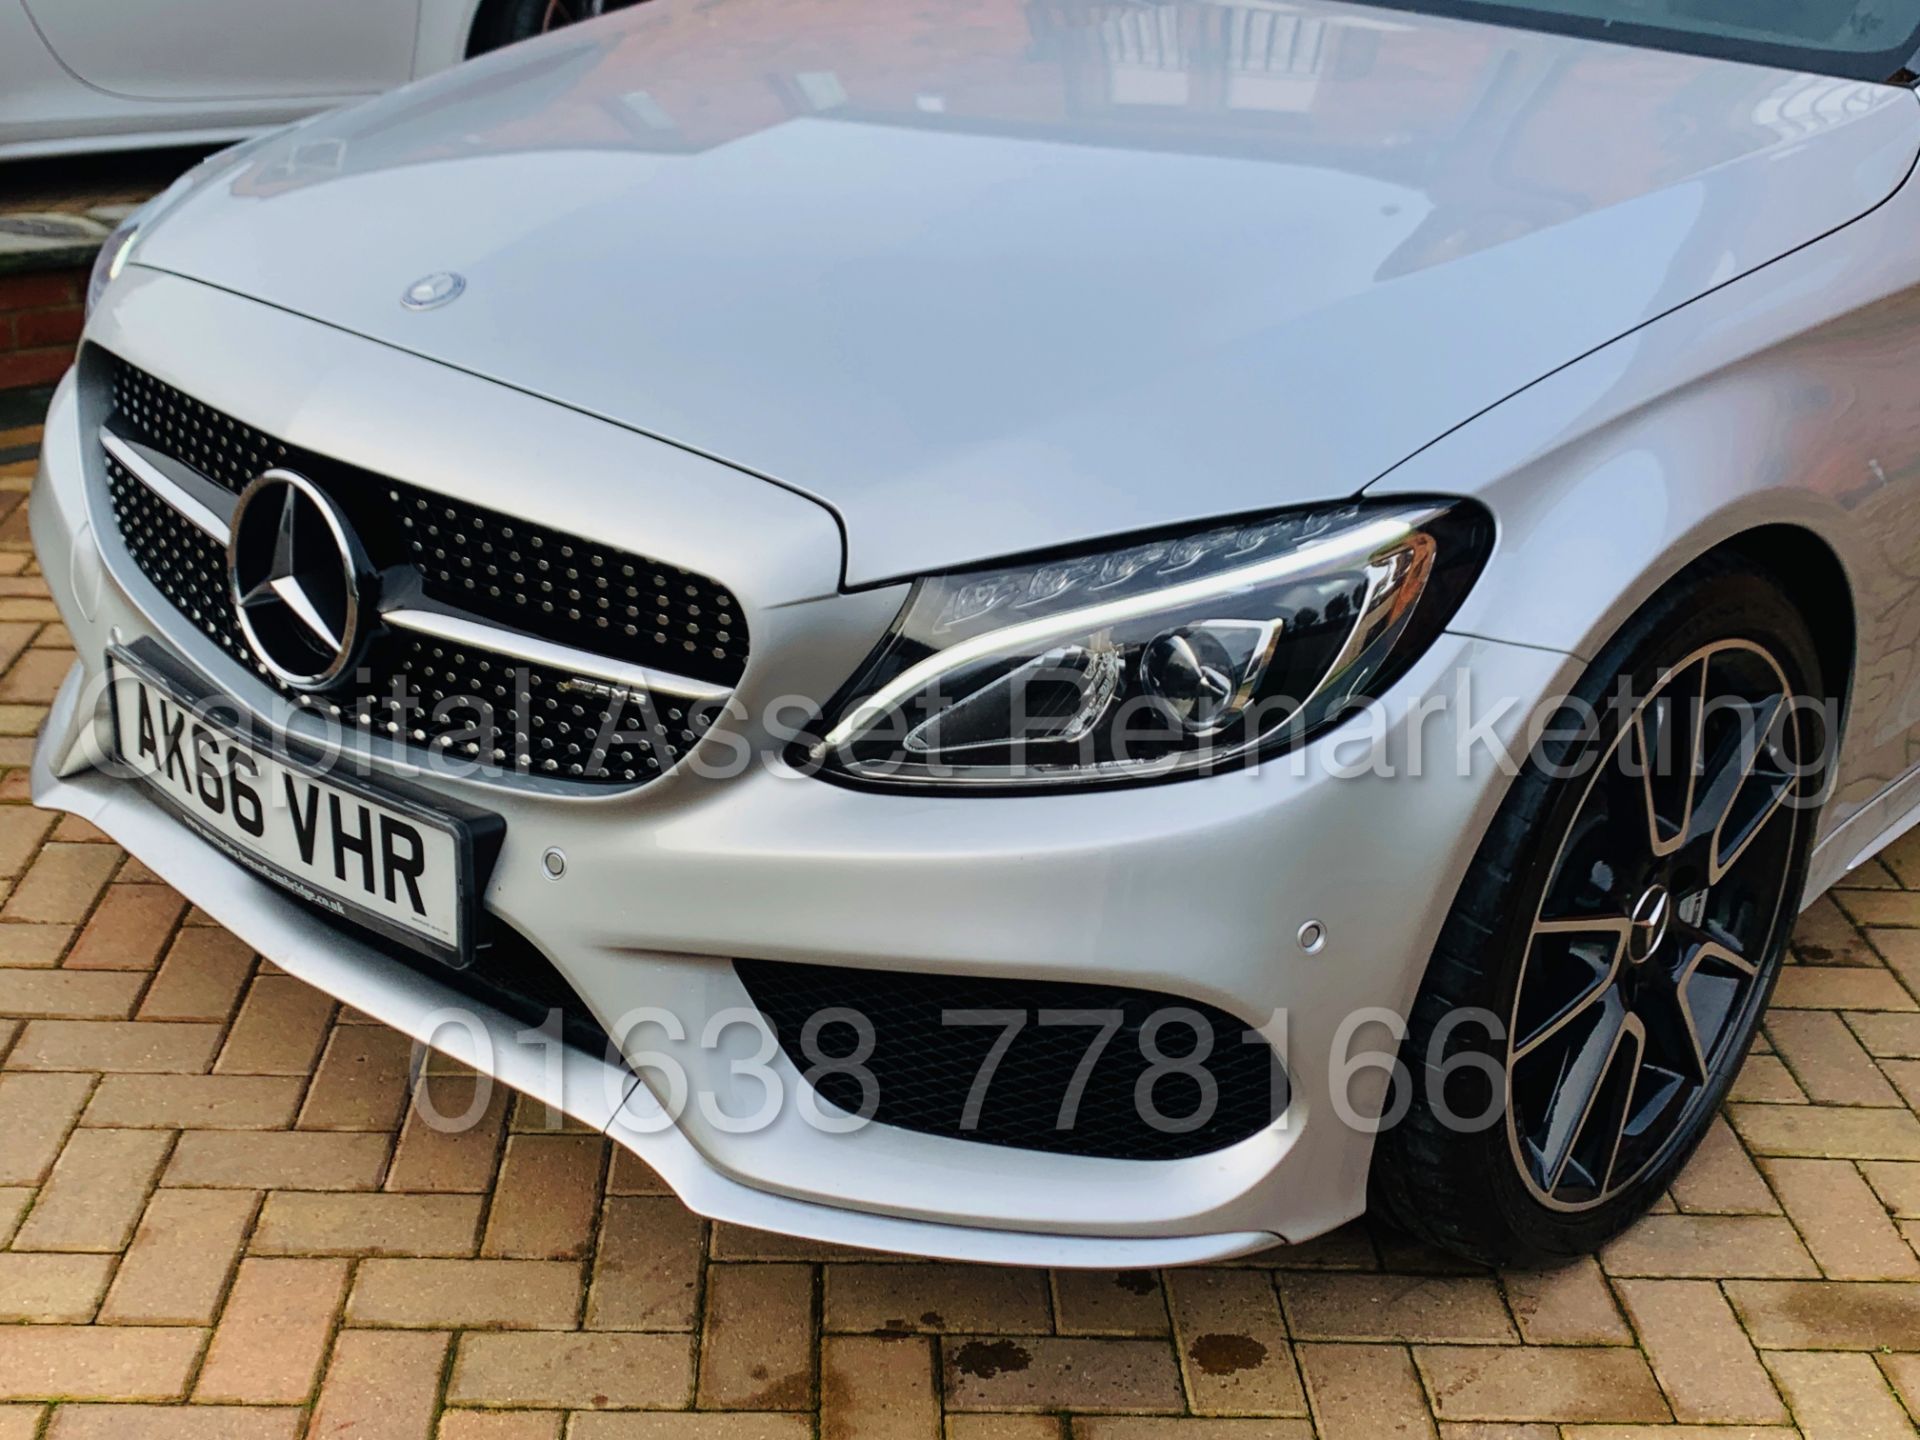 MERCEDES-BENZ C43 AMG *PREMIUM 4 MATIC* COUPE (2017) '9-G AUTO - LEATHER - SAT NAV' **FULLY LOADED** - Image 14 of 46